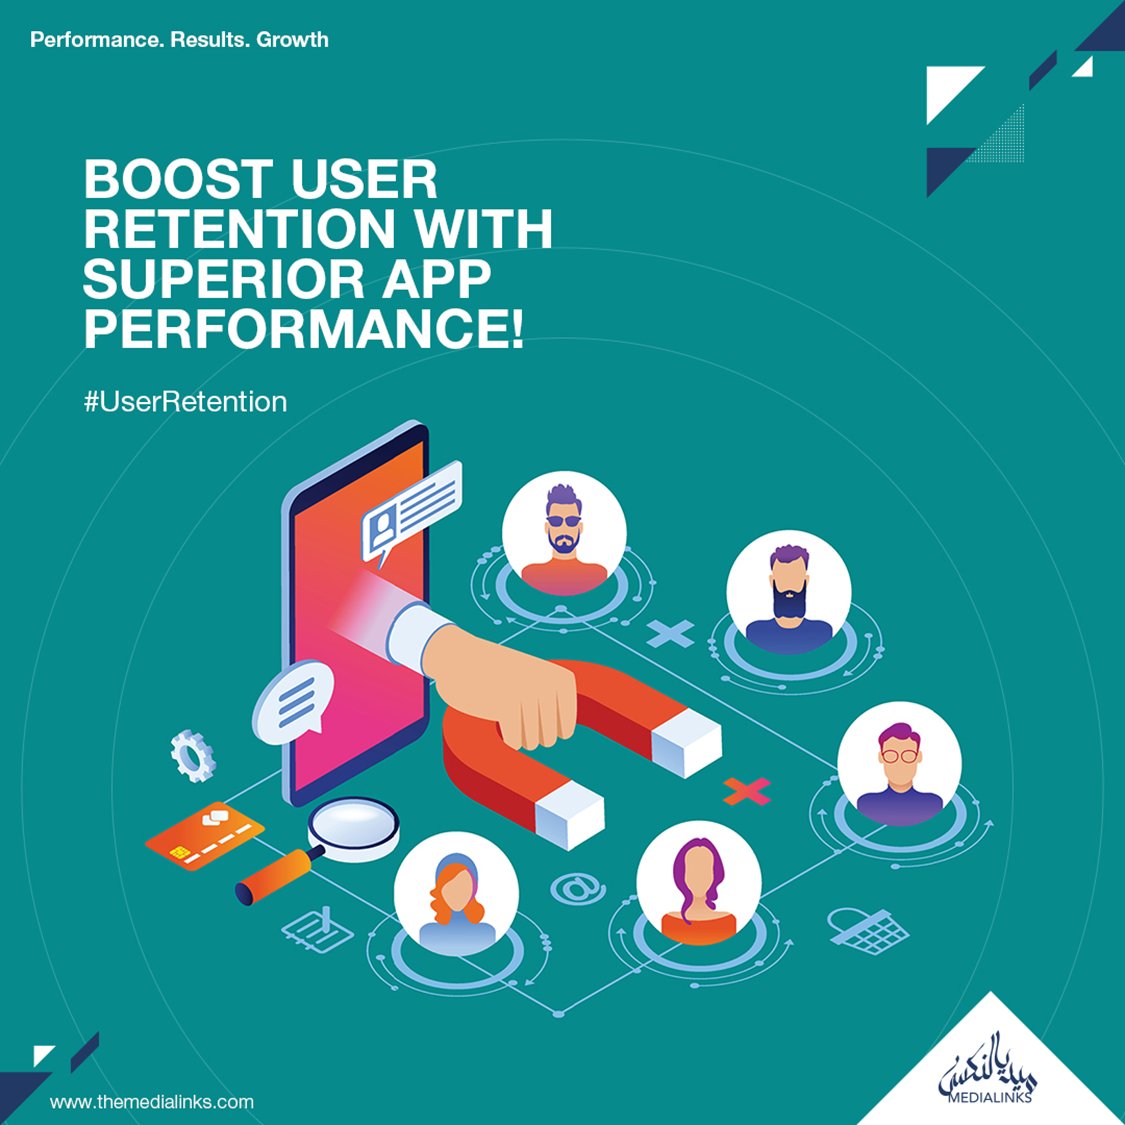 Elevate your app's performance for unbeatable user satisfaction. Let's skyrocket your retention rates together with top-notch app functionality. 

Discover how we boost user loyalty through exceptional app performance.

#AppPerformance 
#UserSatisfaction
#RetentionBoost